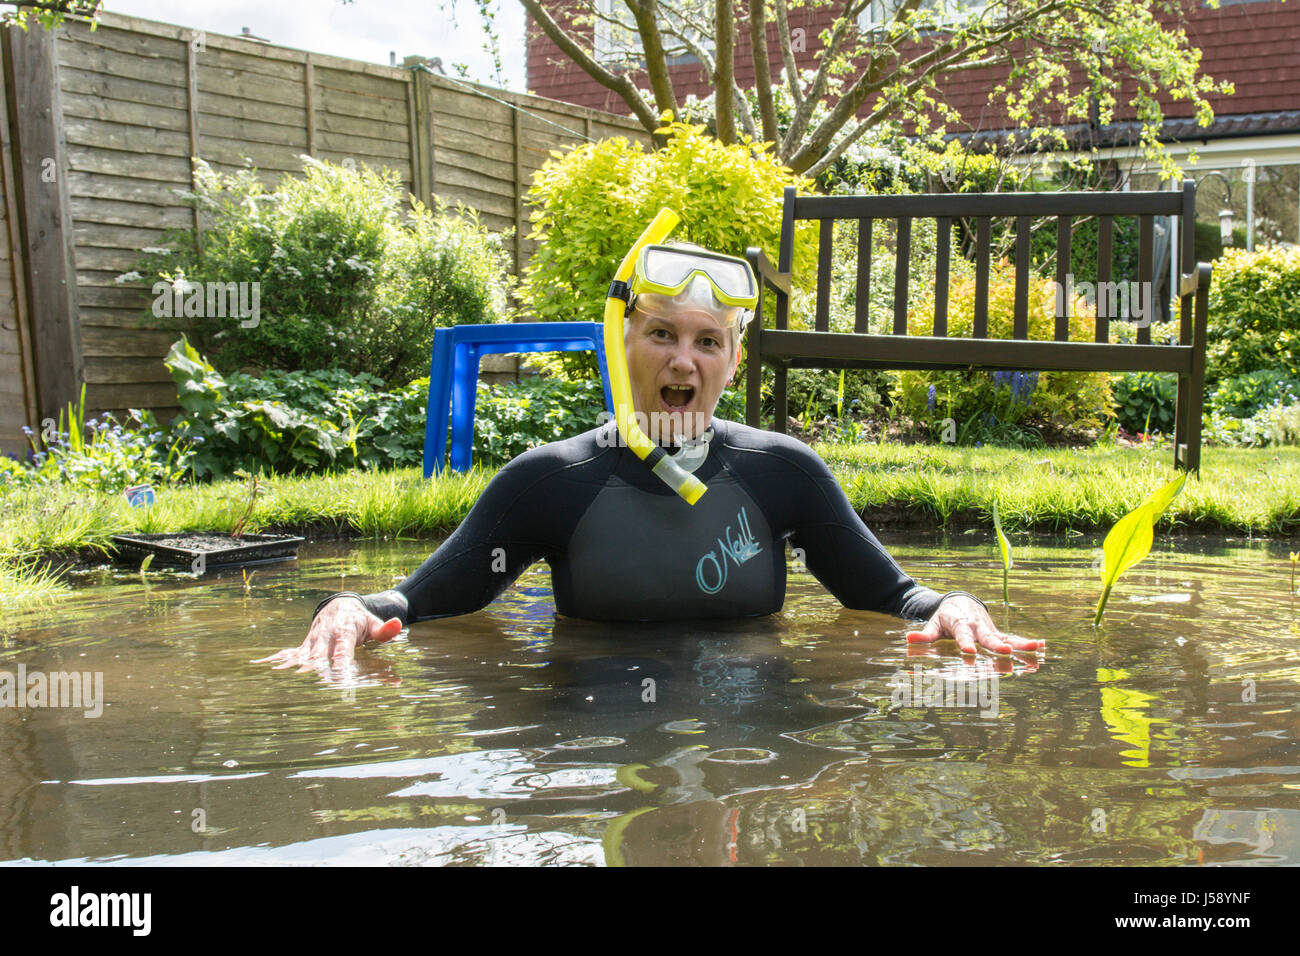 Mature woman having fun wearing wetsuit, goggles, snorkel, in small garden pond, moving pond plants. Having a laugh. Just for fun. As a joke. UK. Stock Photo